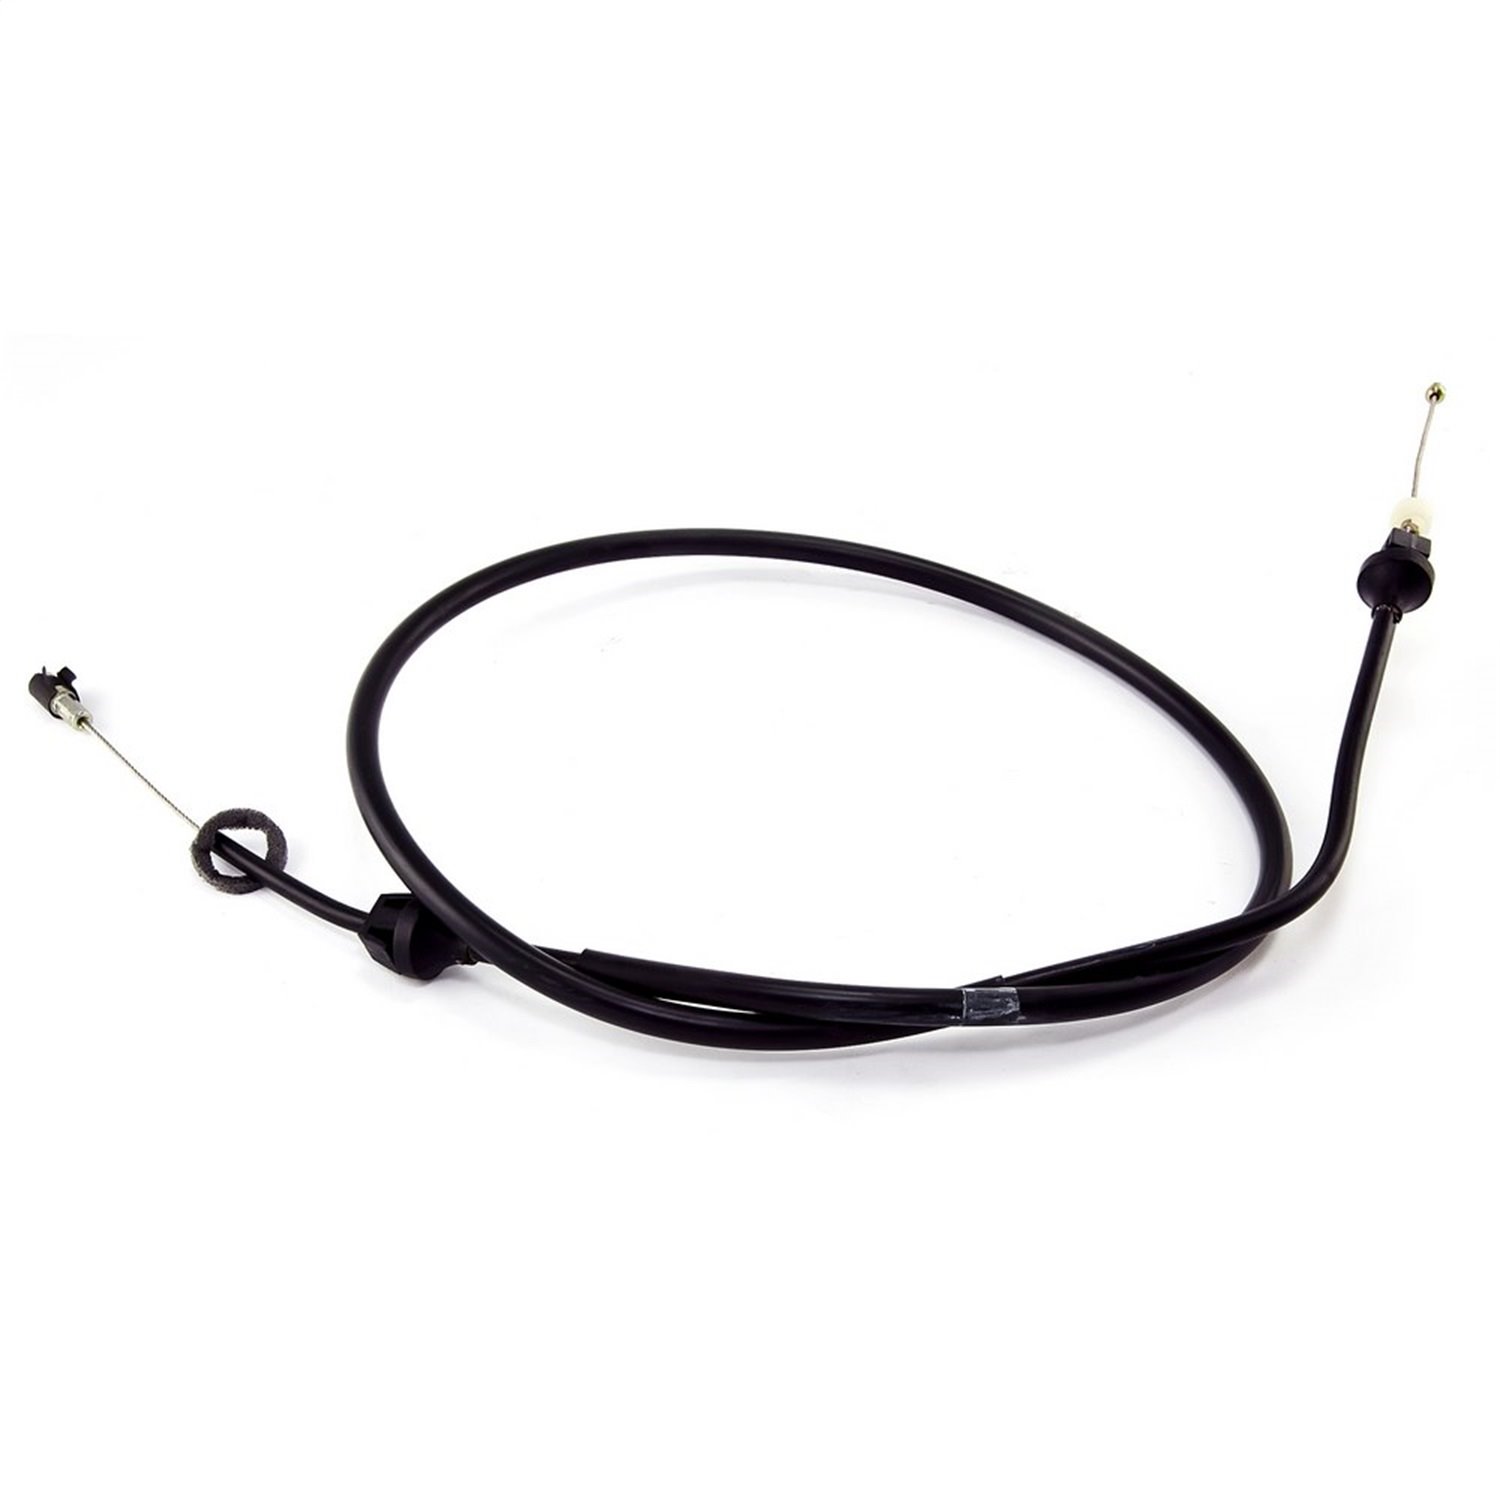 Accelerator Cable 1991-1995 Cherokee 2.5L and 4.0L